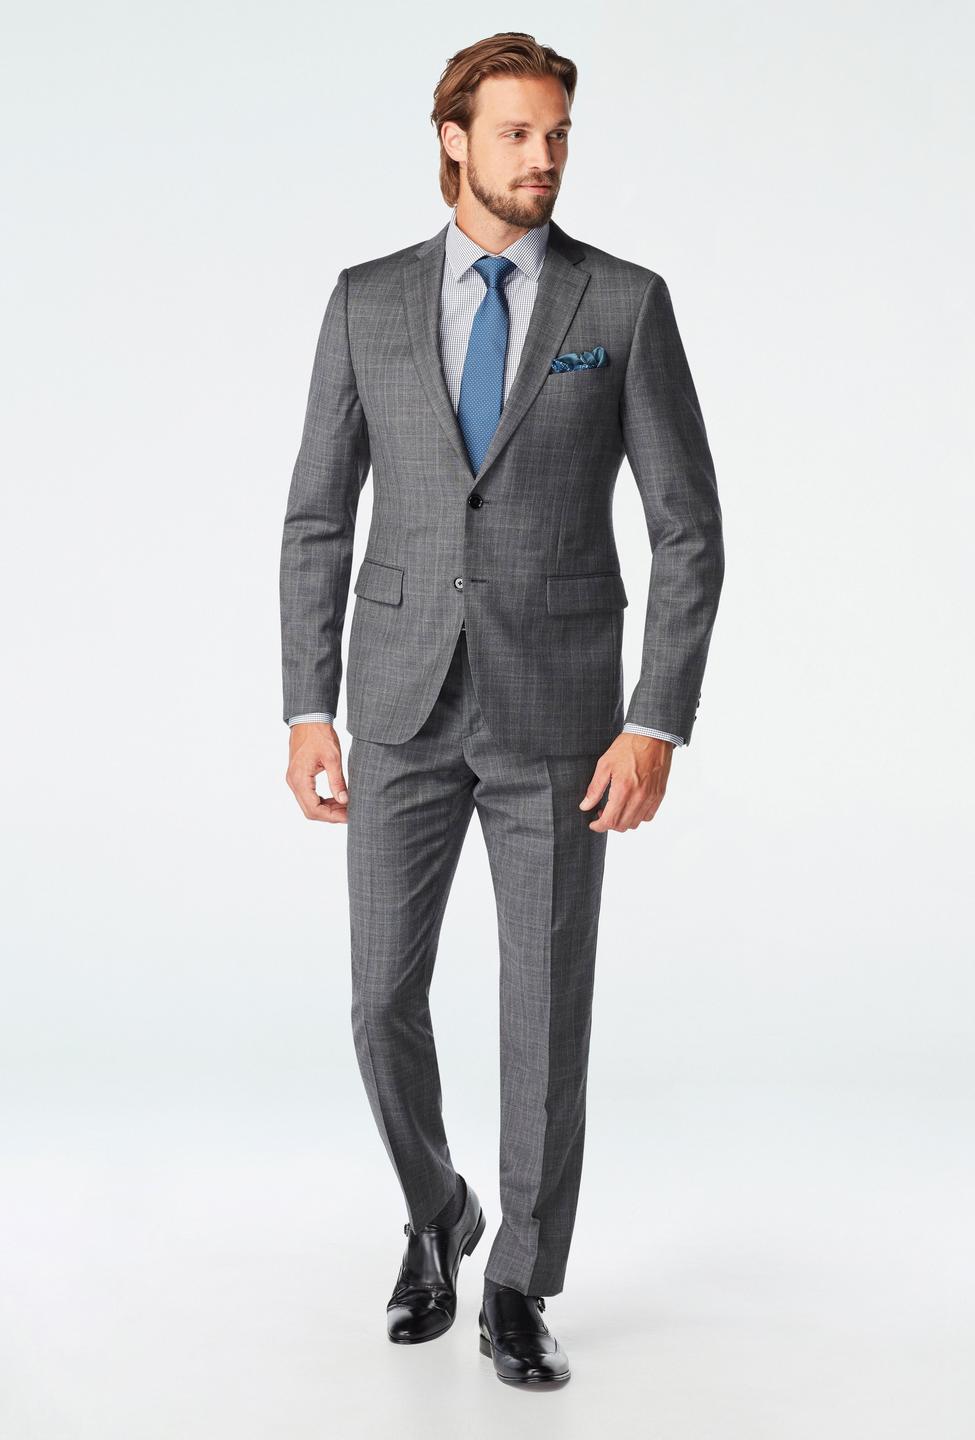 Gray suit - Harrogate Checked Design from Luxury Indochino Collection